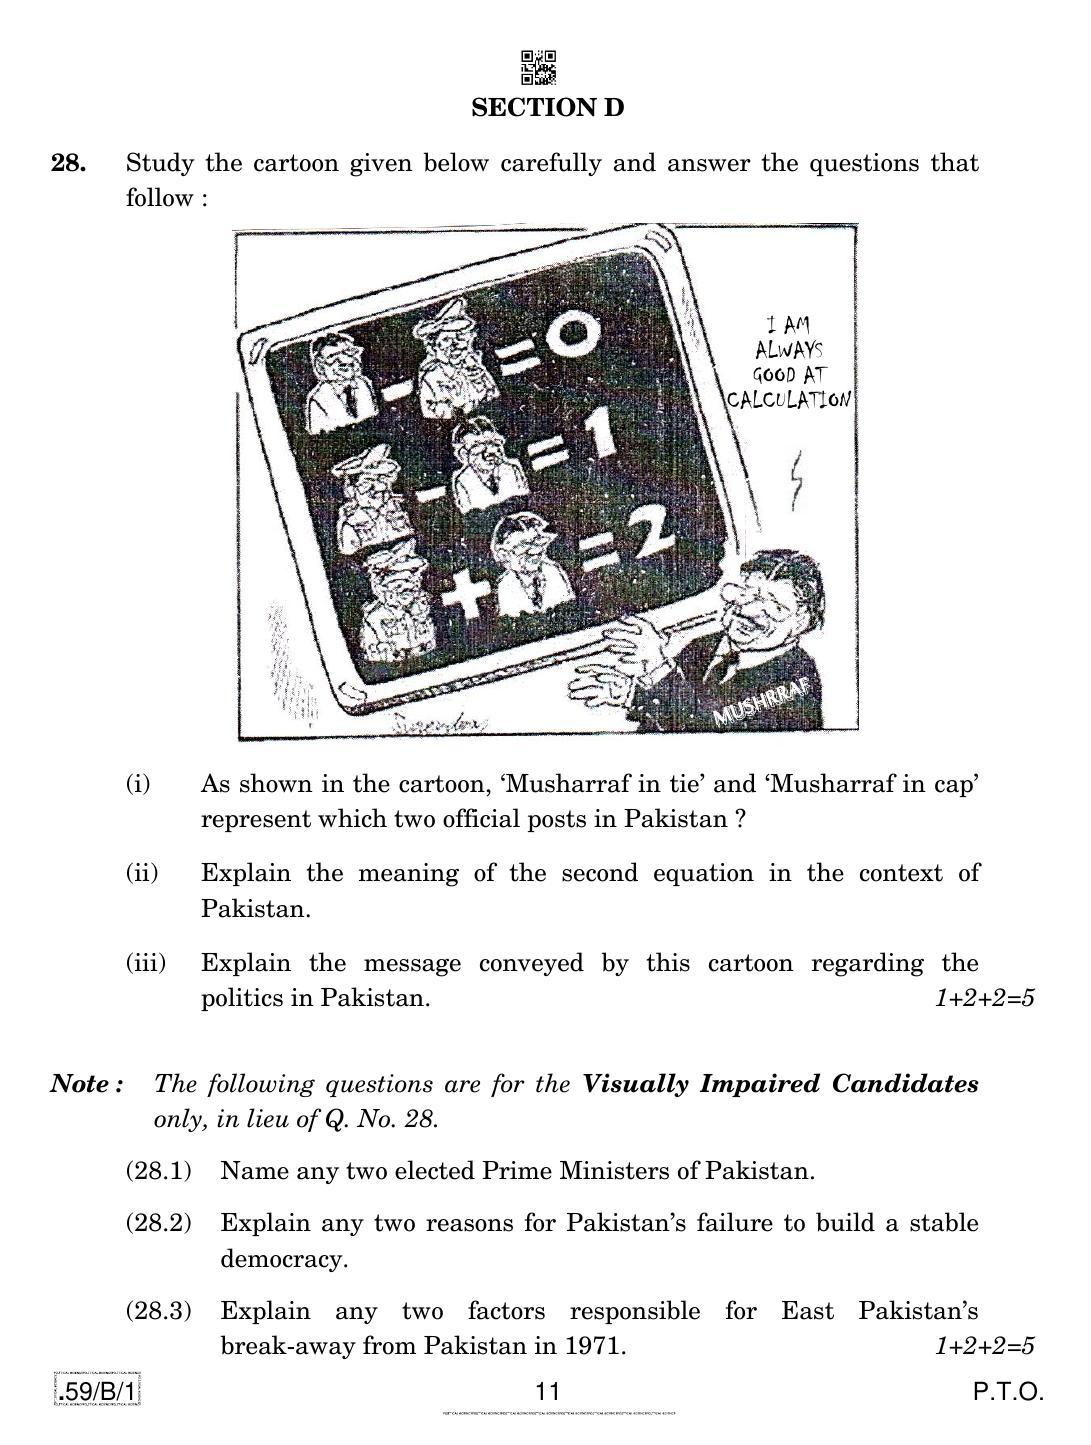 CBSE Class 12 59-C-1 - Political Science 2020 Compartment Question Paper - Page 11